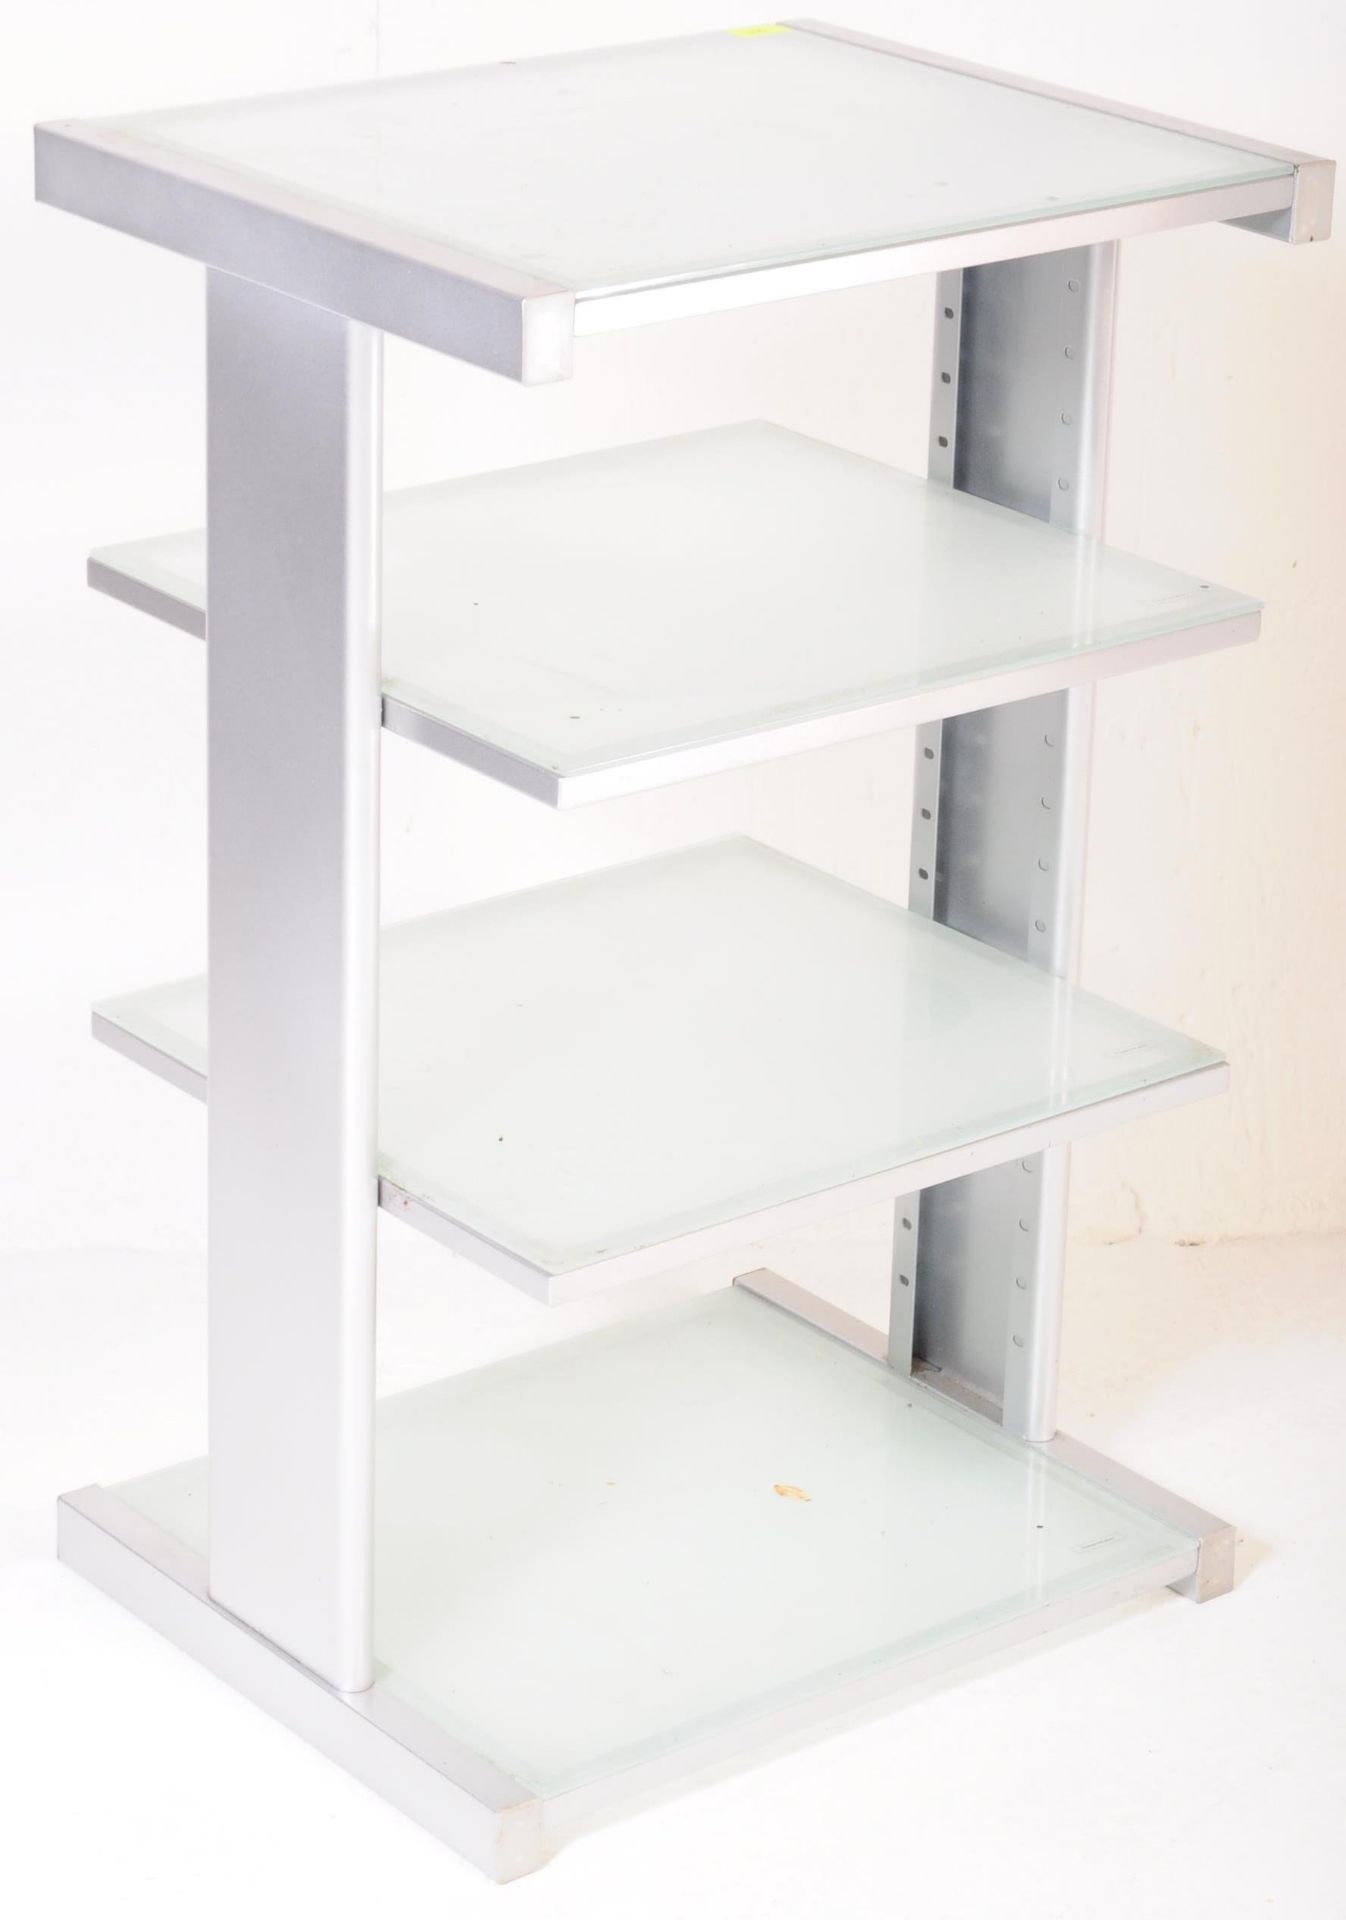 RETRO VINTAGE MID 20TH CENTURY GLASS TIERED SHELVING STAND - Image 2 of 4